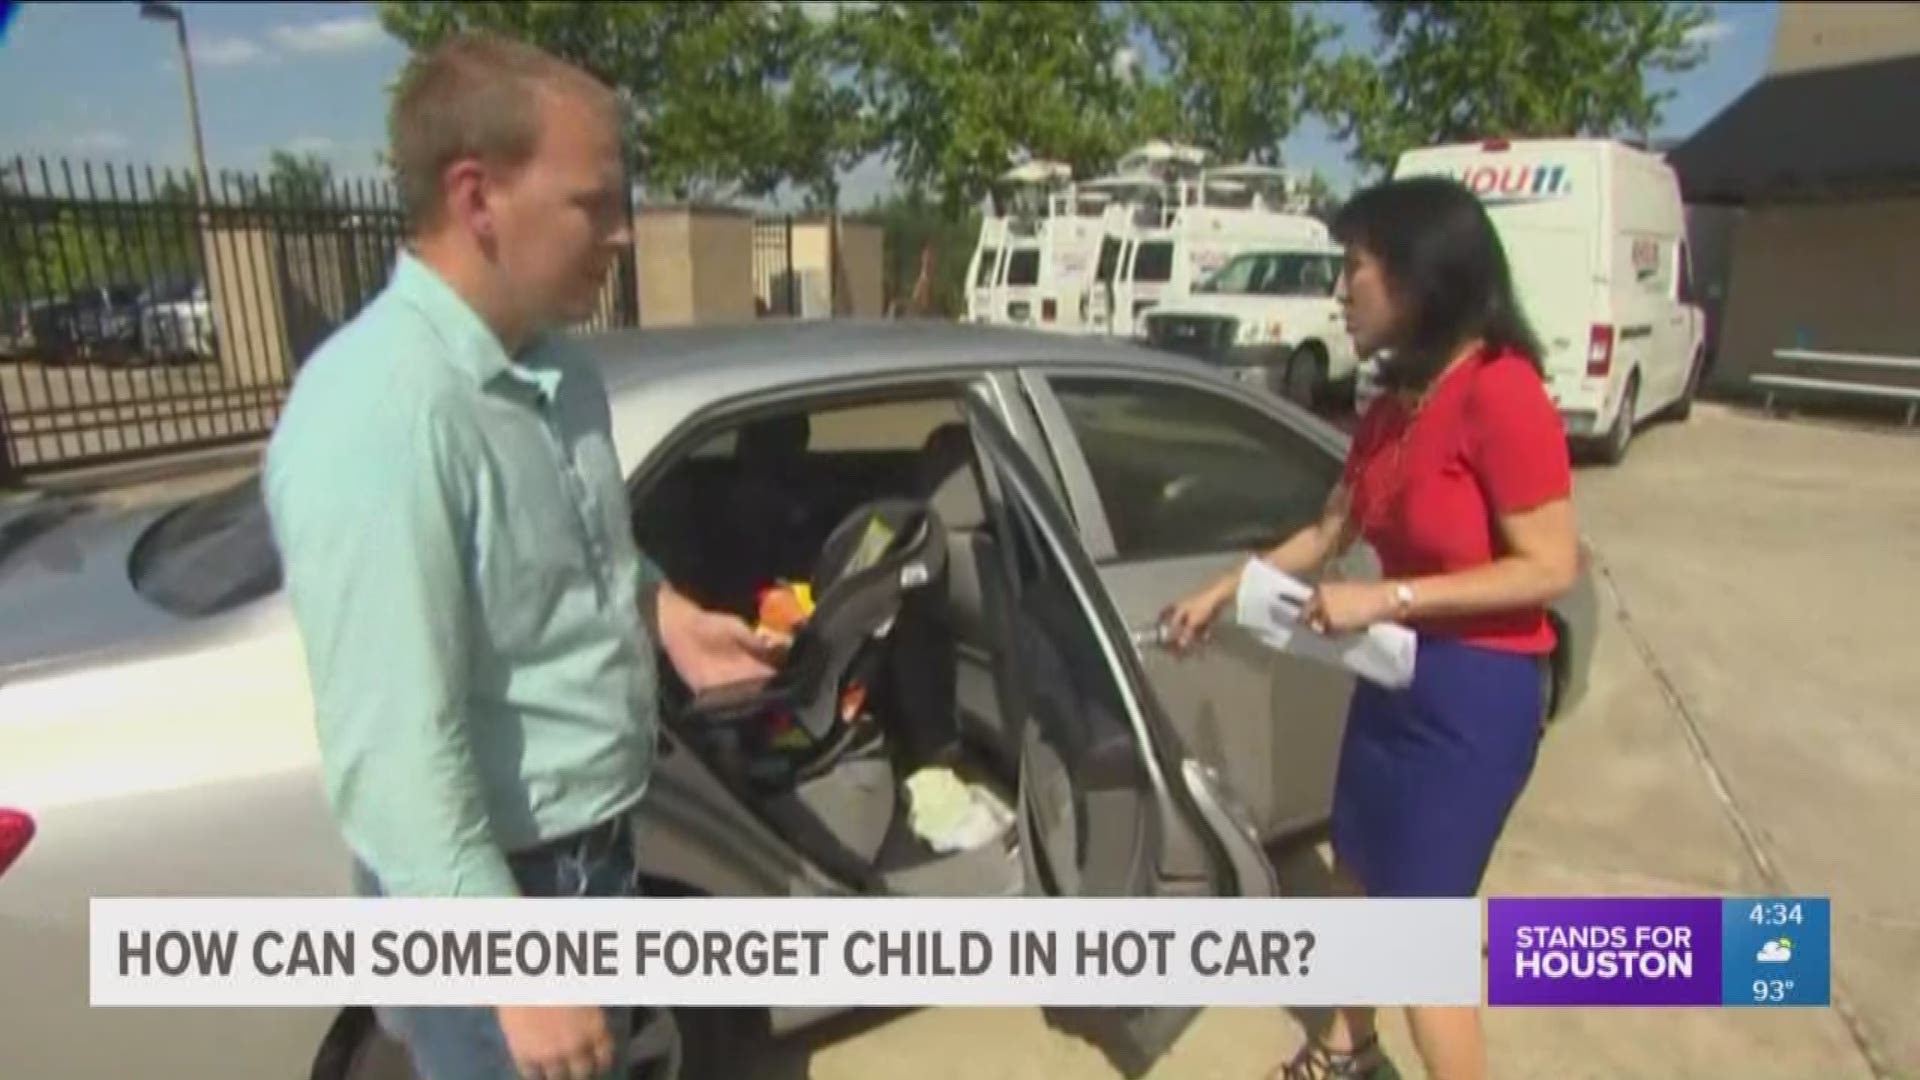 KHOU 11 anchor Shern-min Chow talks to KHOU 11 Digital Producer Matt Keyser about tips and tricks on how to remind yourself not to forget your child in your vehicle. 